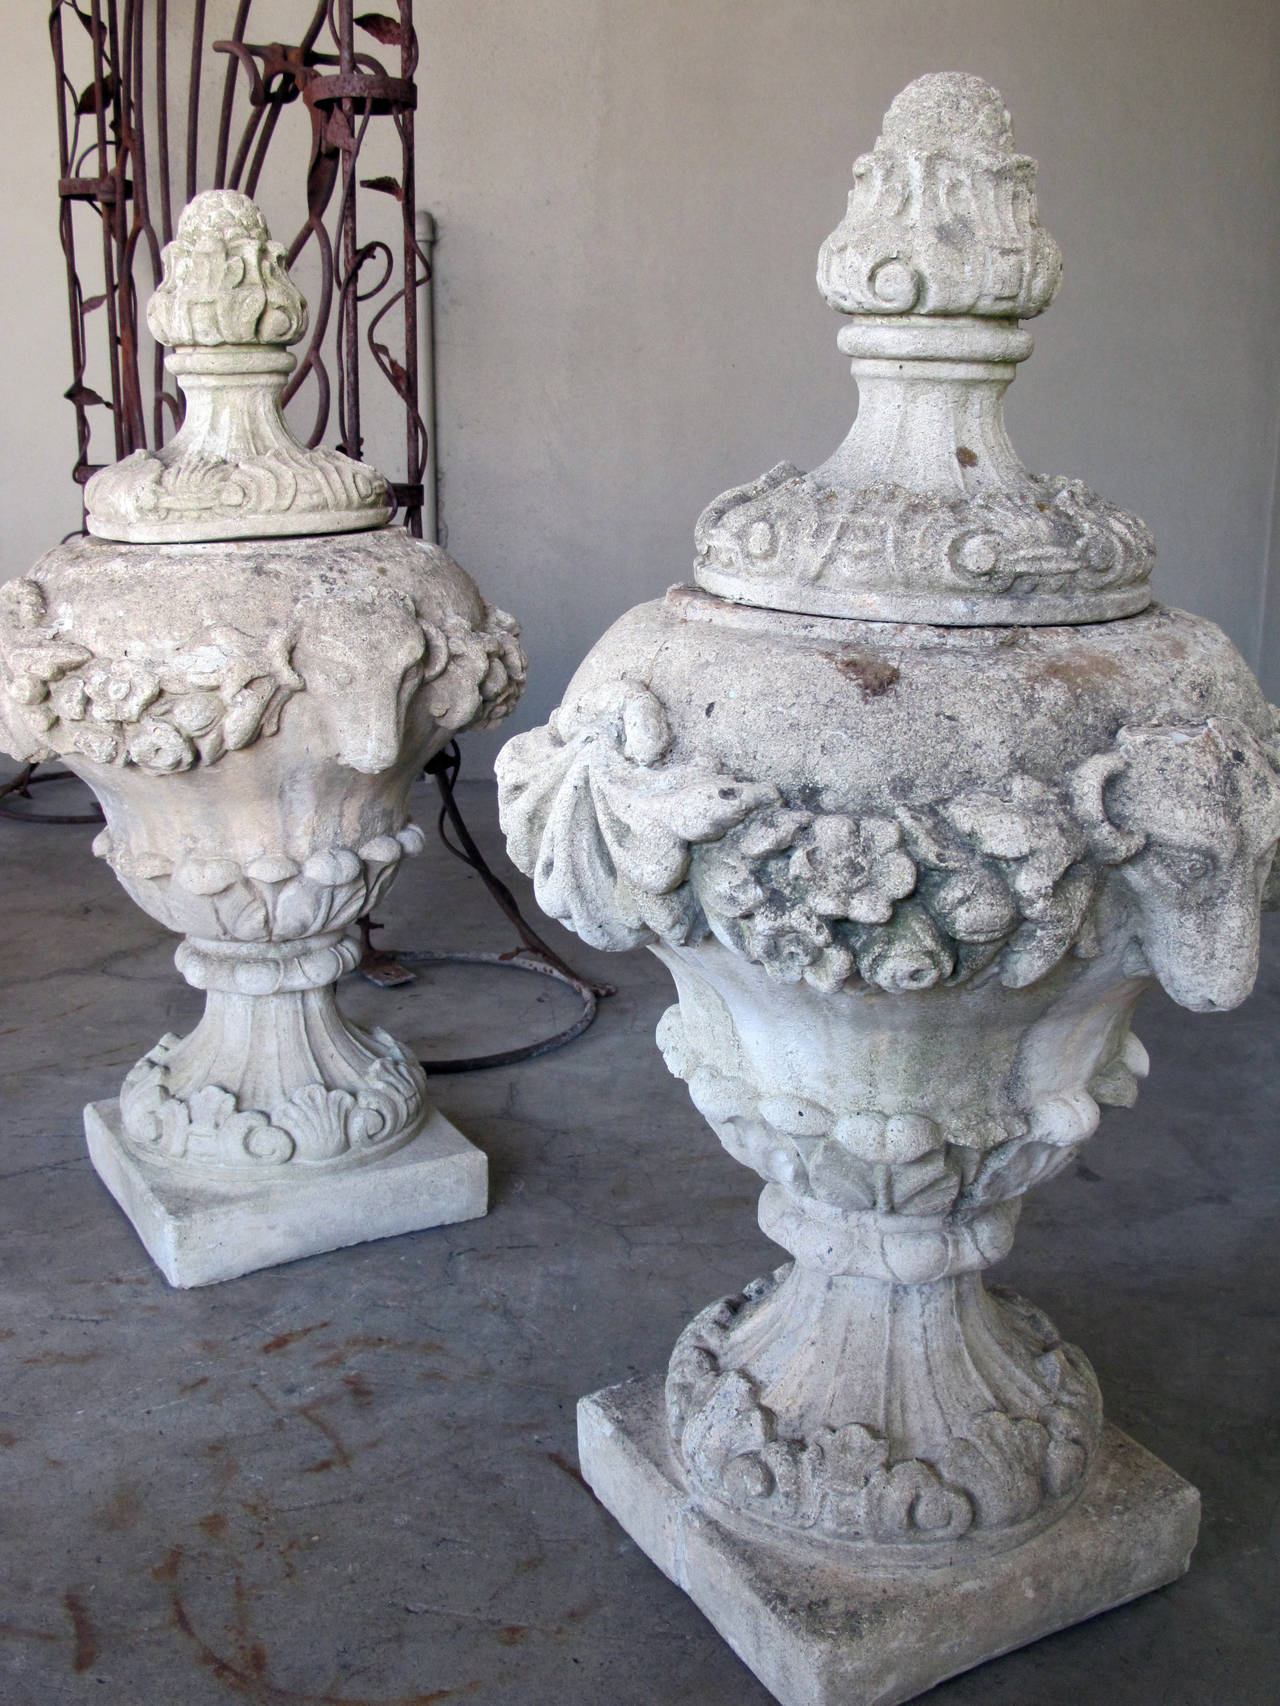 Great Britain (UK) Pair of English Cast Stone Urn-Form Finials with Swag and Ram's-Head Motif